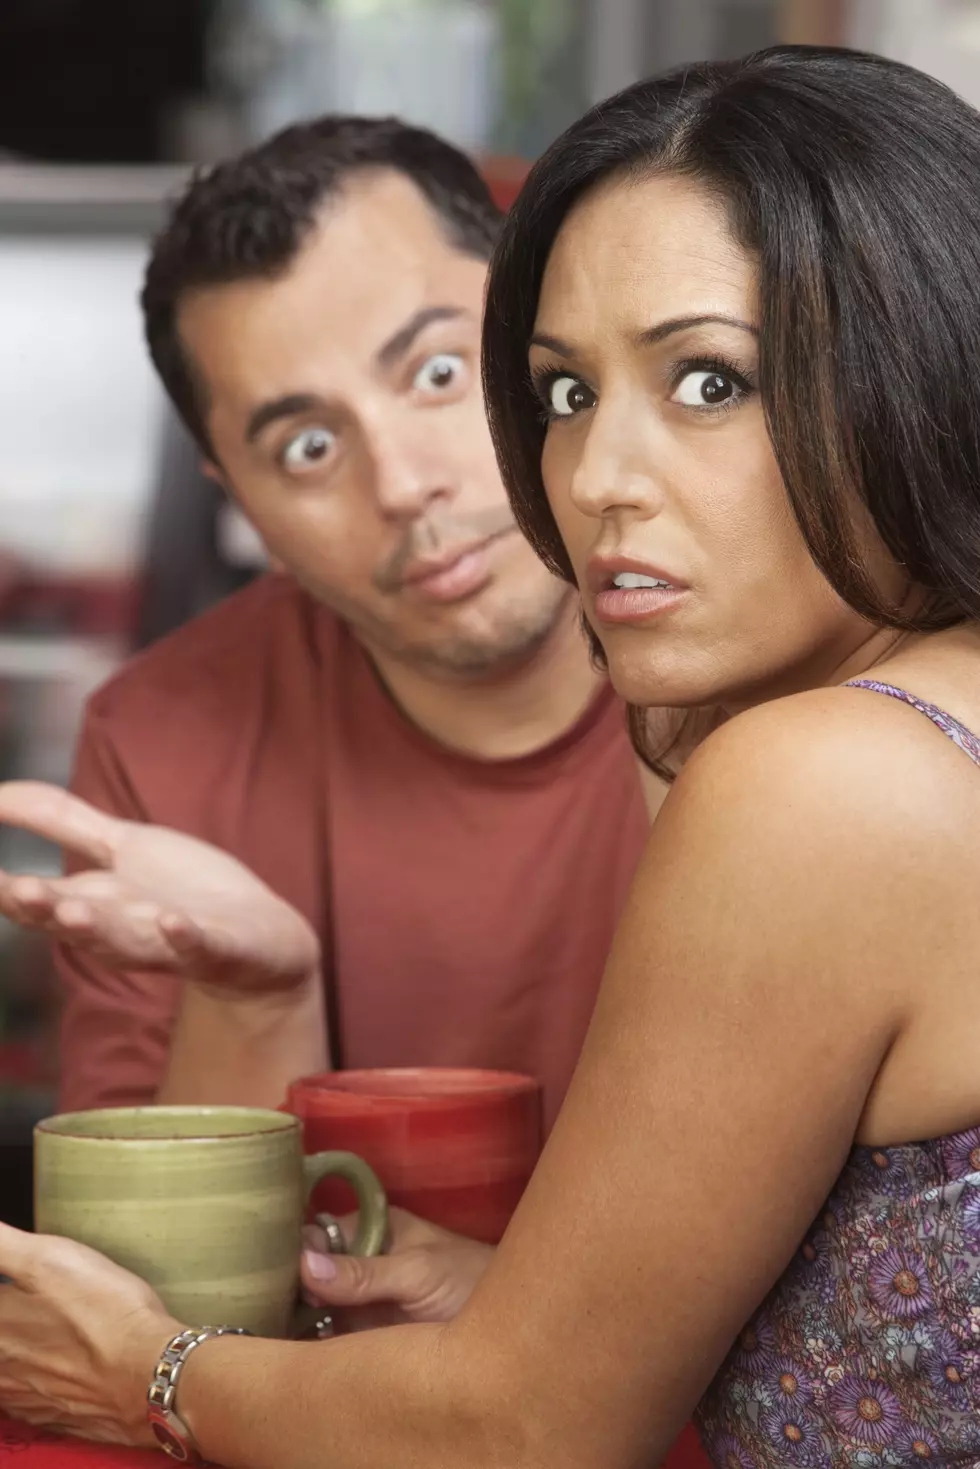 Reddit Users Share The Creepiest Thing Someone Has Told Them on a First Date